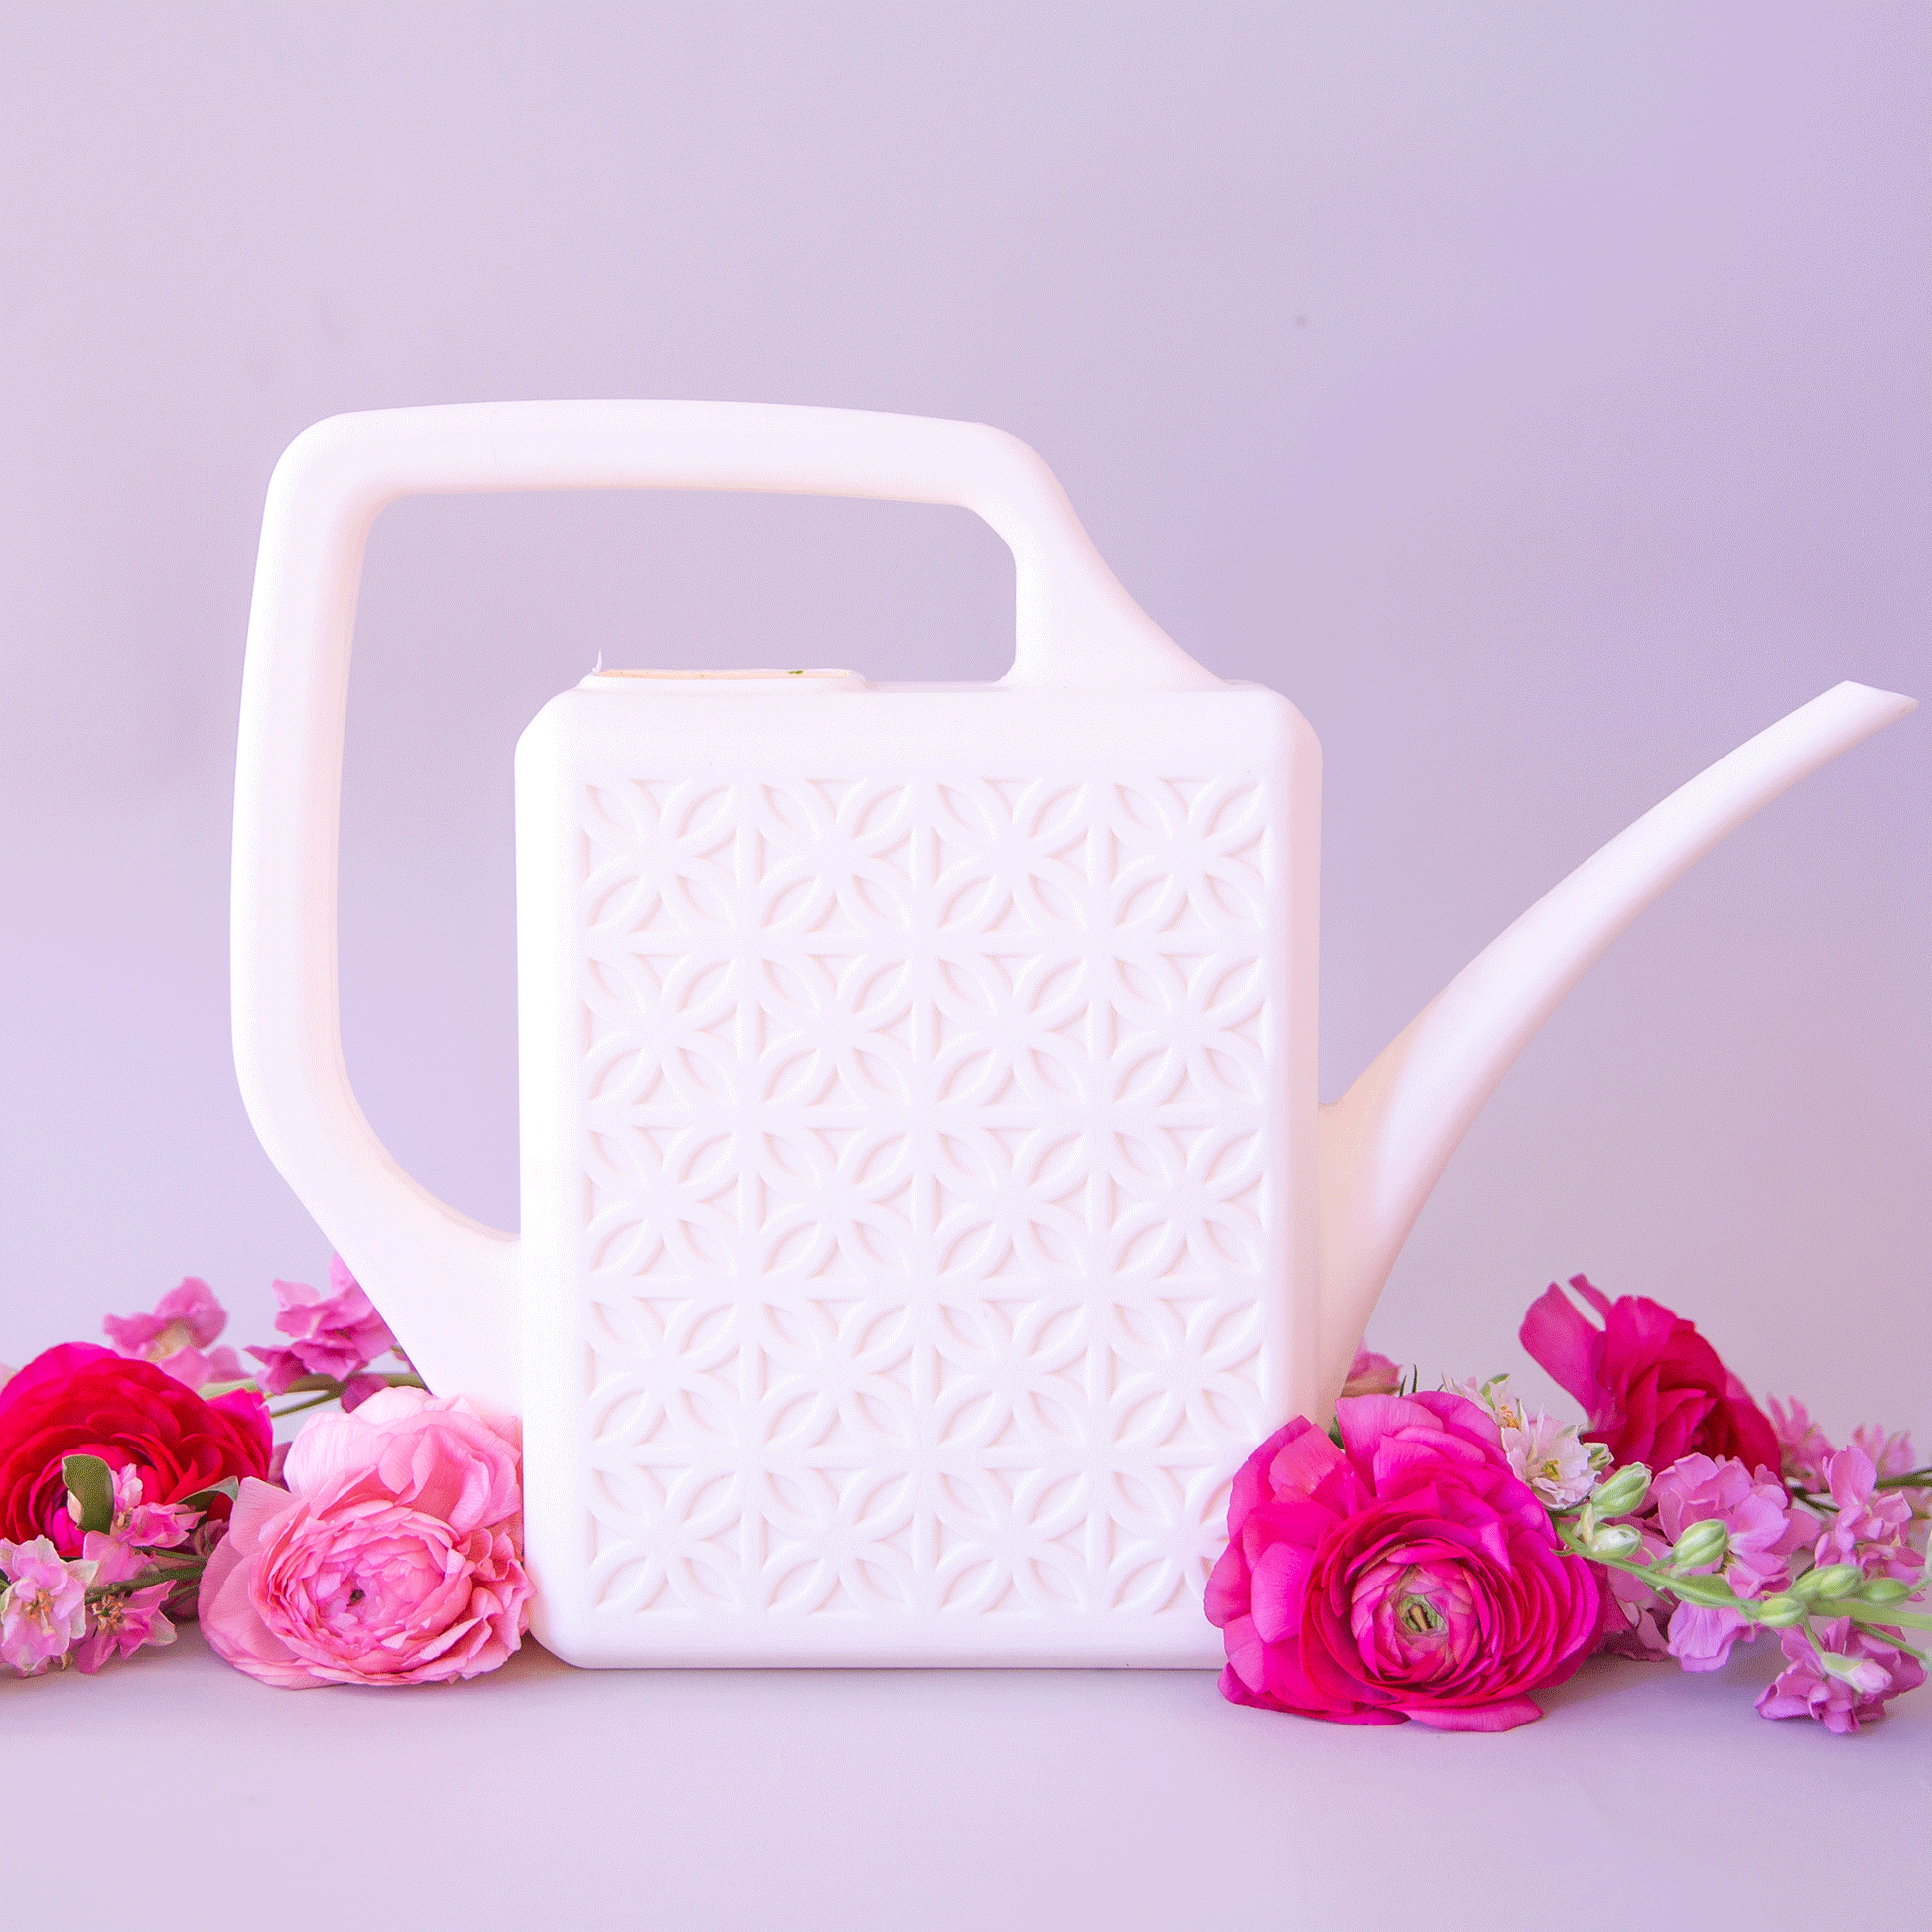 On a purple background is a white watering can with a long spout and a breeze block design on the side.